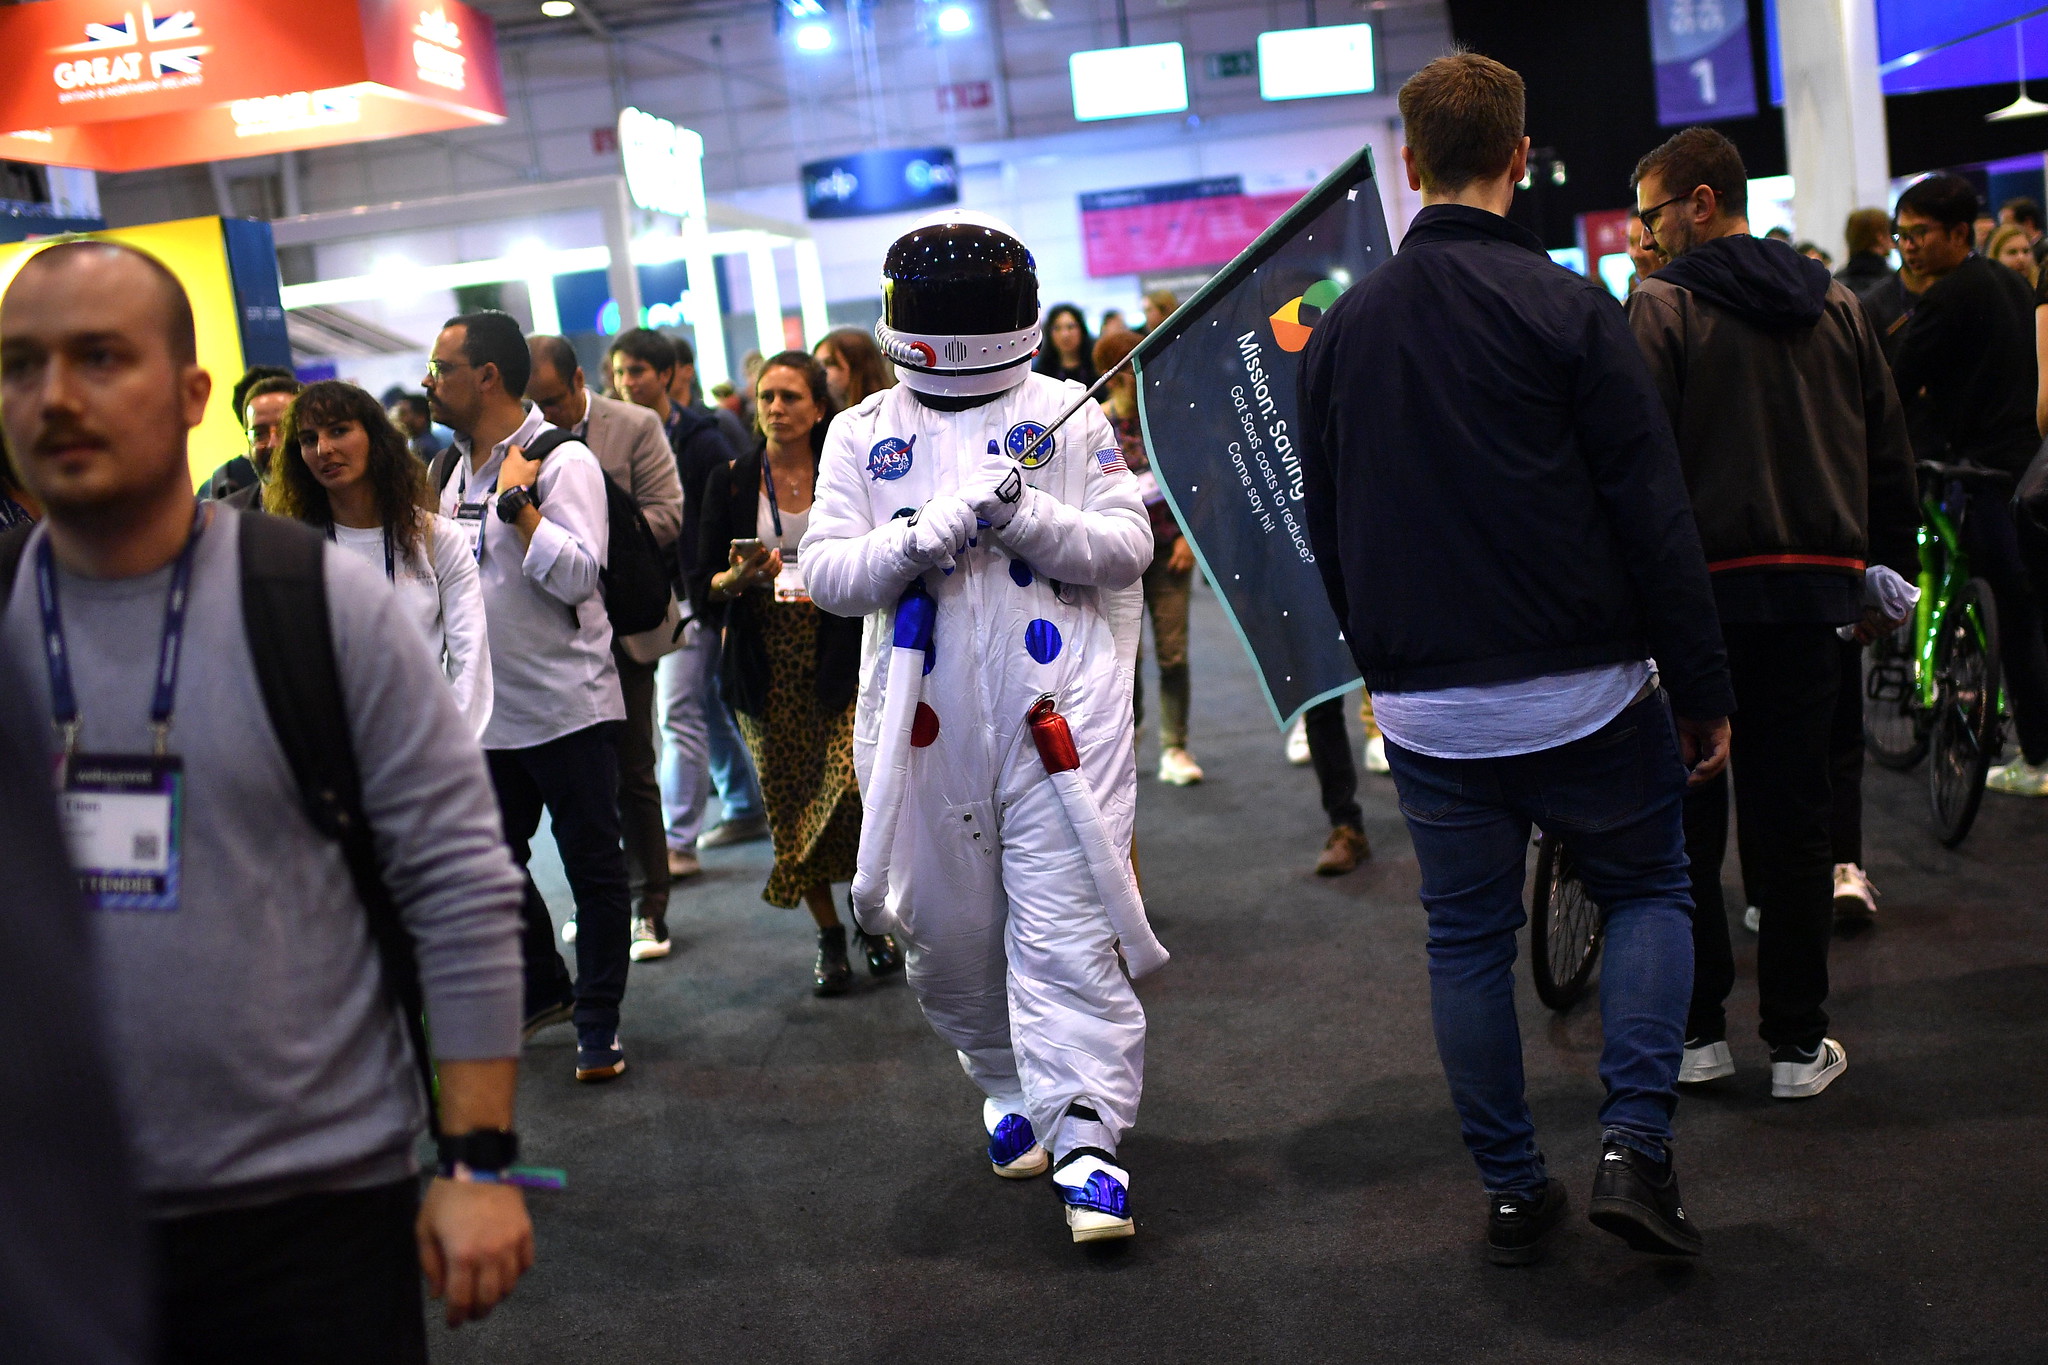 The mascot from Sastrify during day two of Web Summit 2022 at the Altice Arena in Lisbon, Portugal.